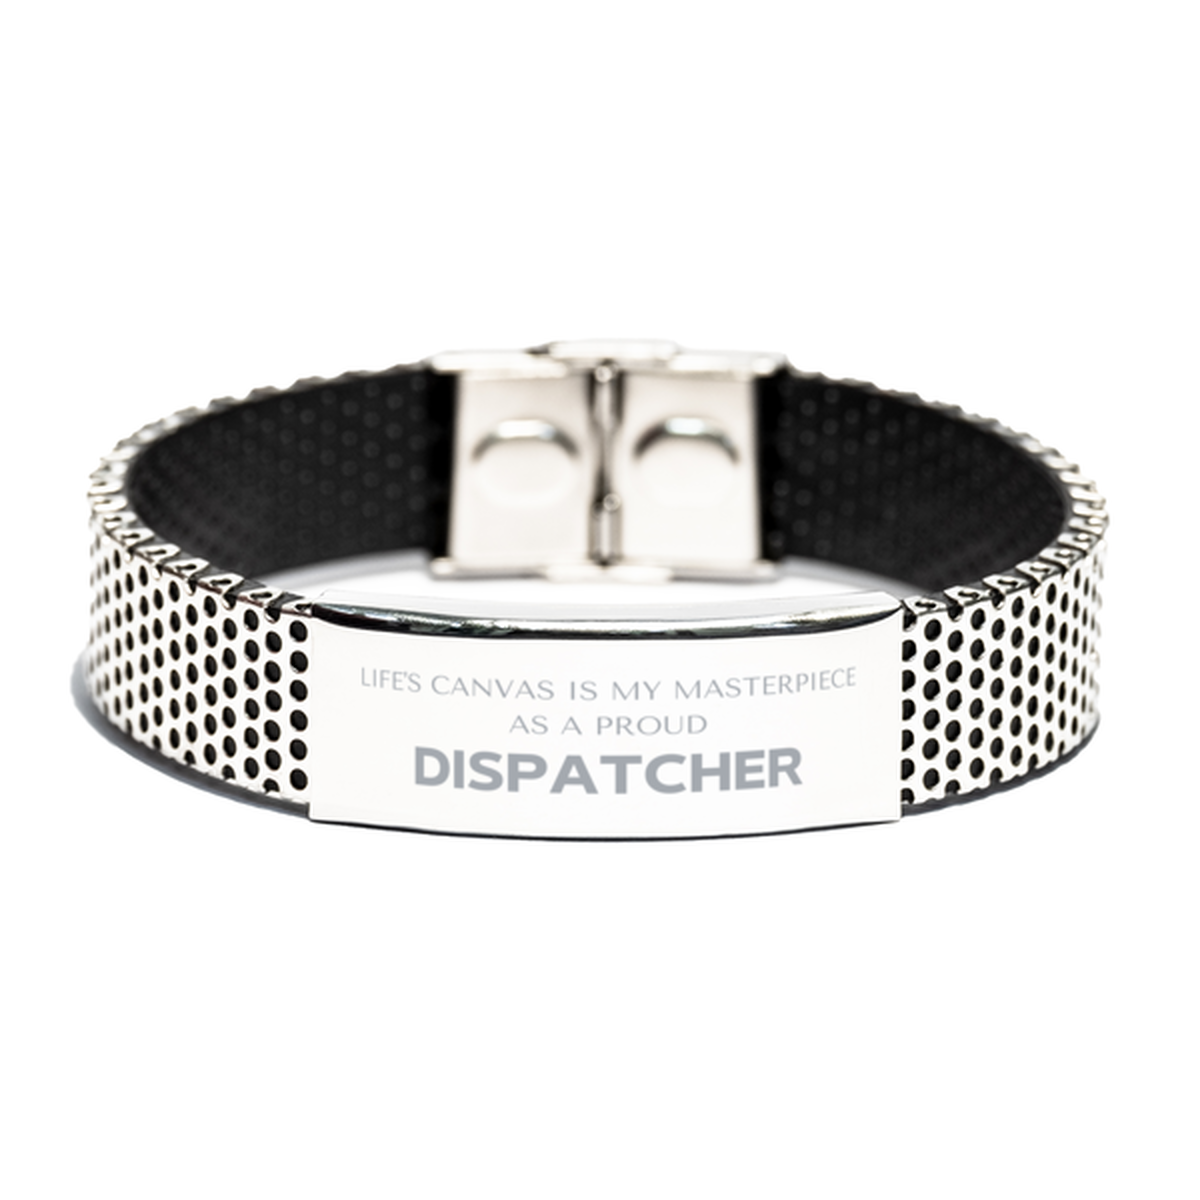 Proud Dispatcher Gifts, Life's canvas is my masterpiece, Epic Birthday Christmas Unique Stainless Steel Bracelet For Dispatcher, Coworkers, Men, Women, Friends